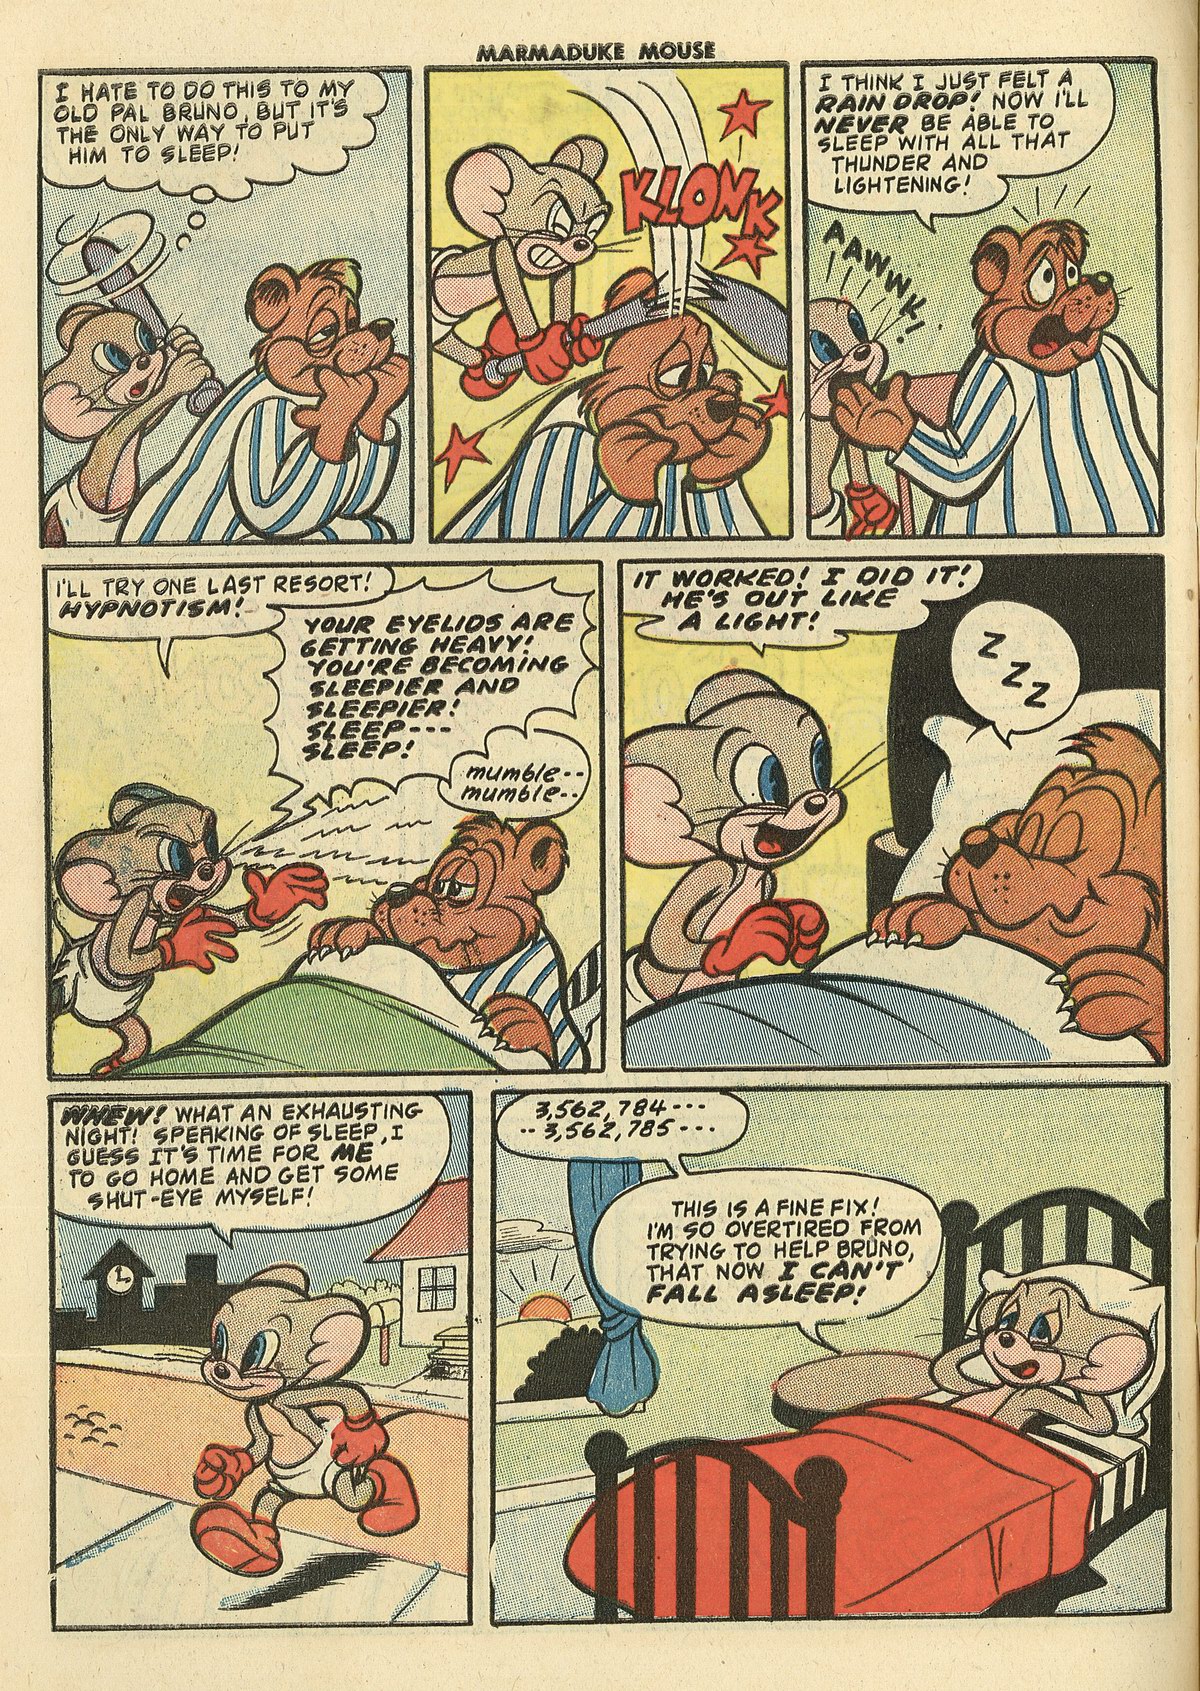 Read online Marmaduke Mouse comic -  Issue #49 - 32